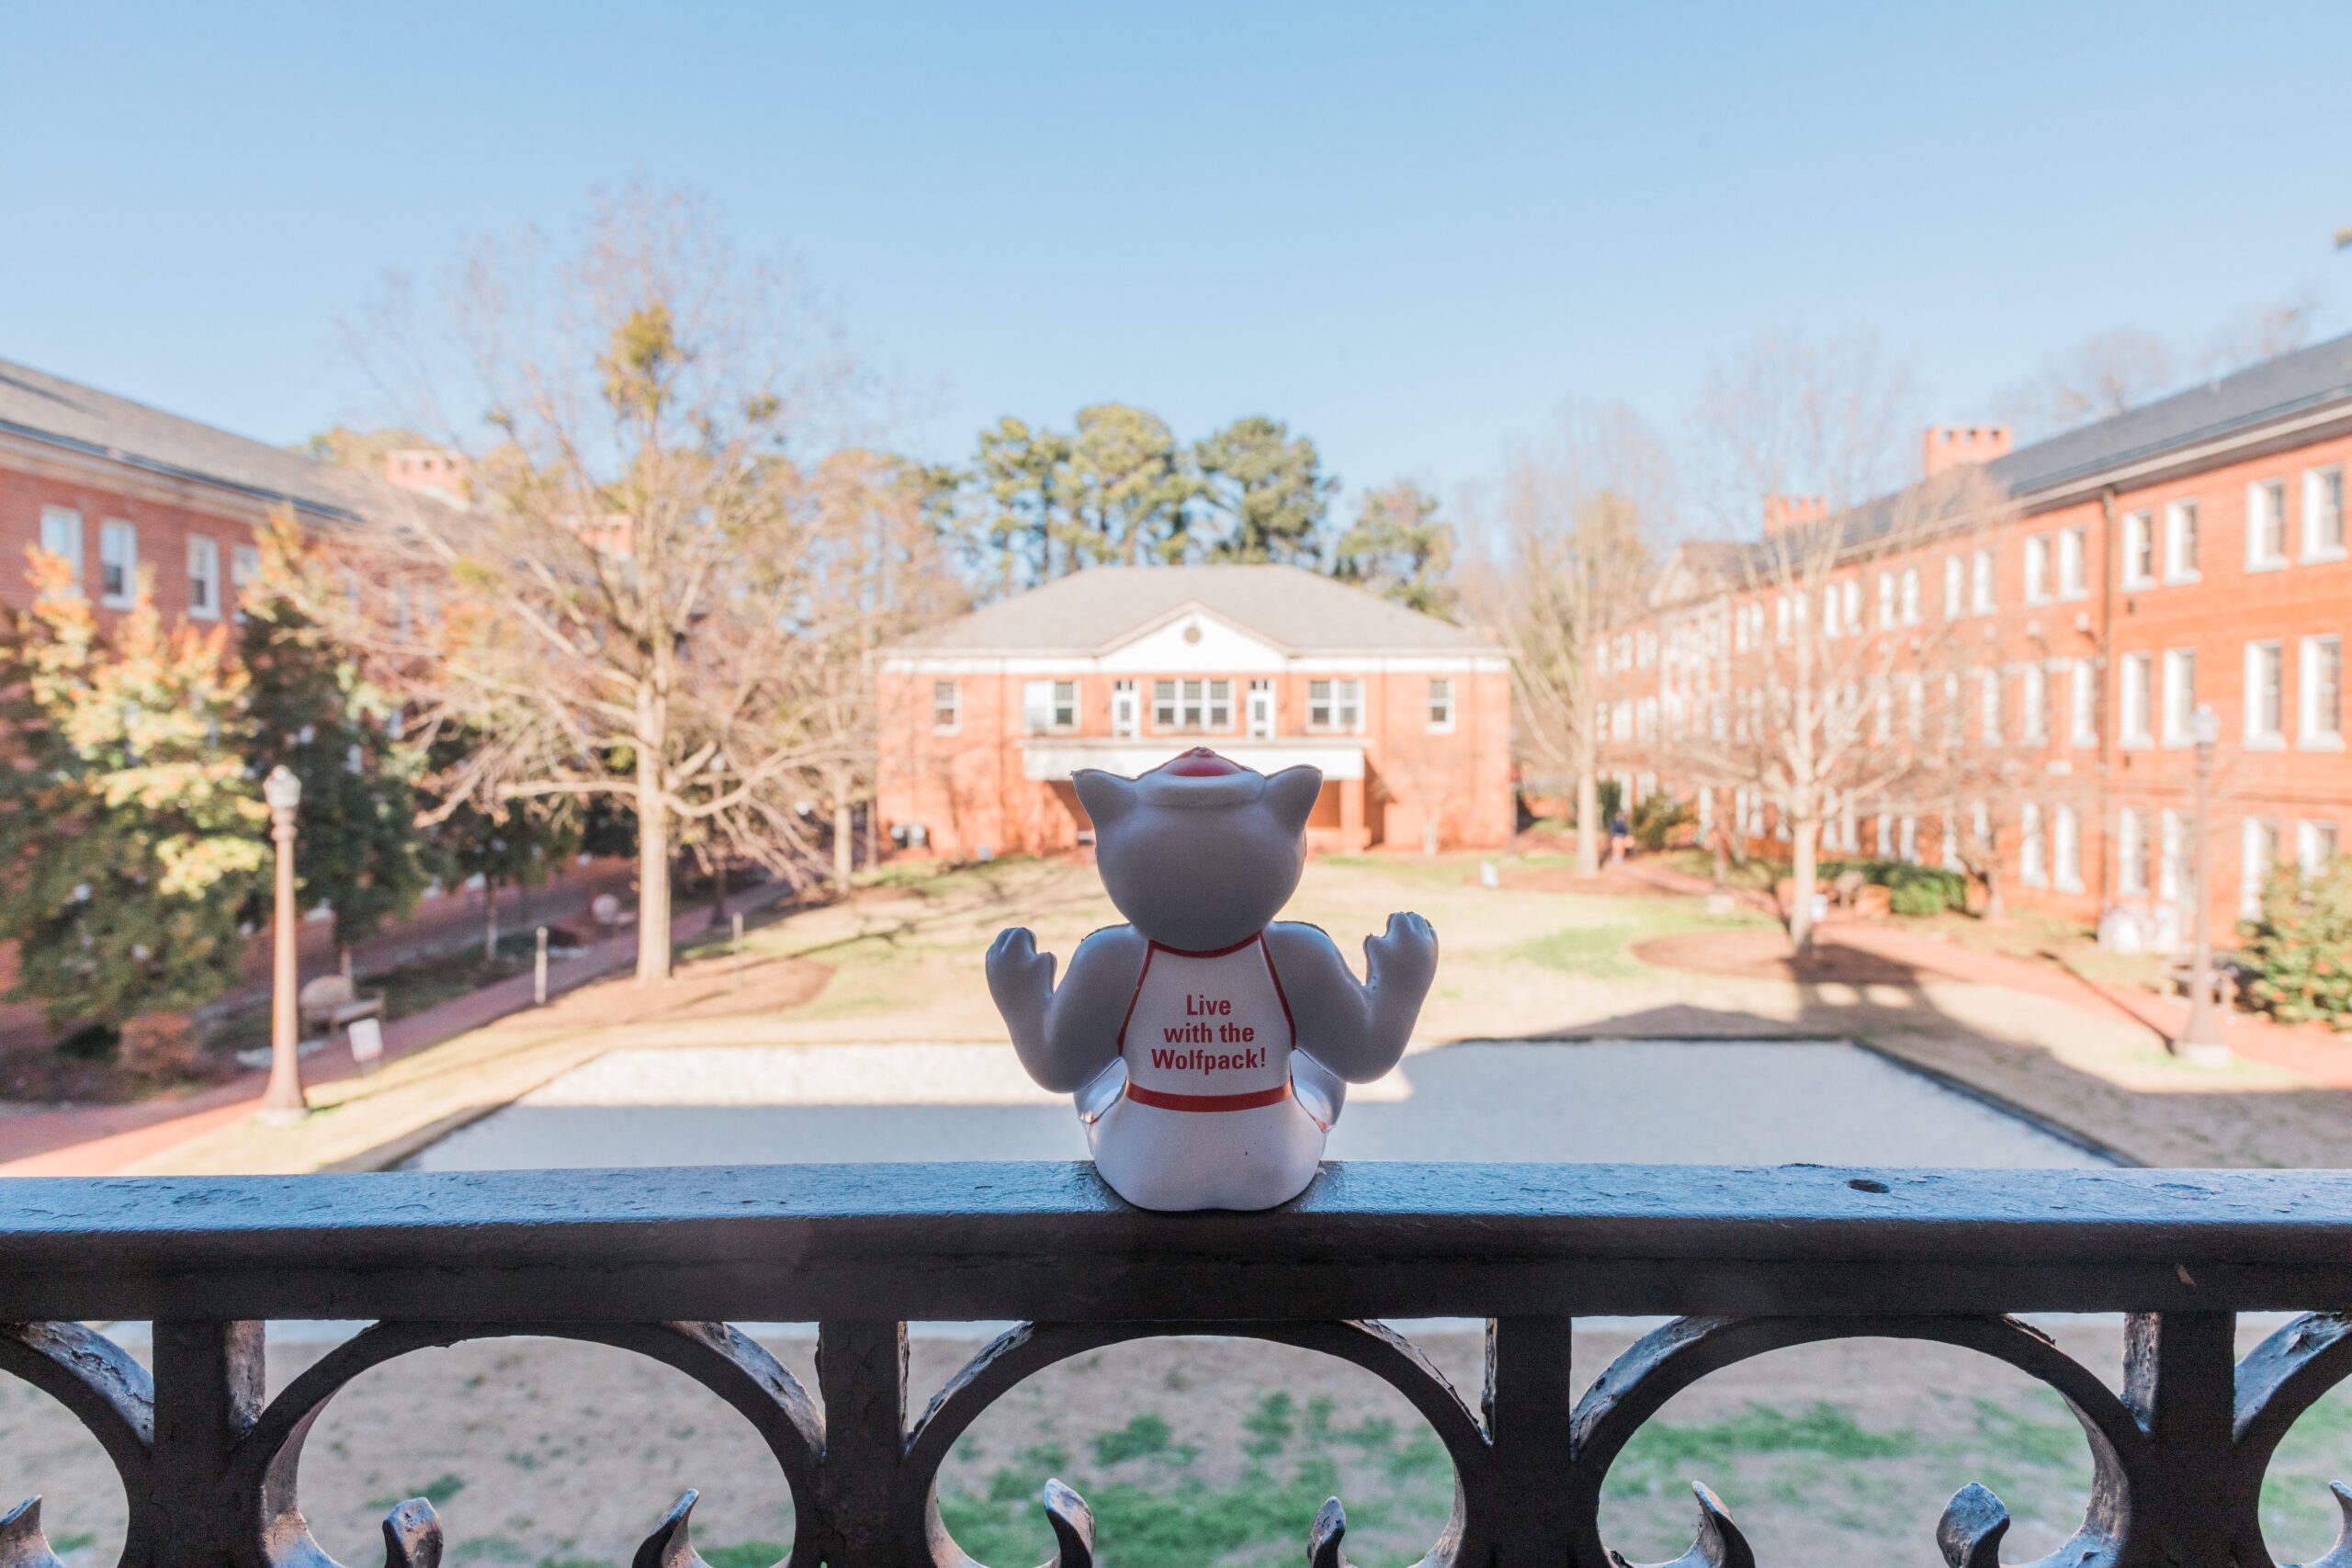 Mini Mr. Wuf toy in front of the Quad community.